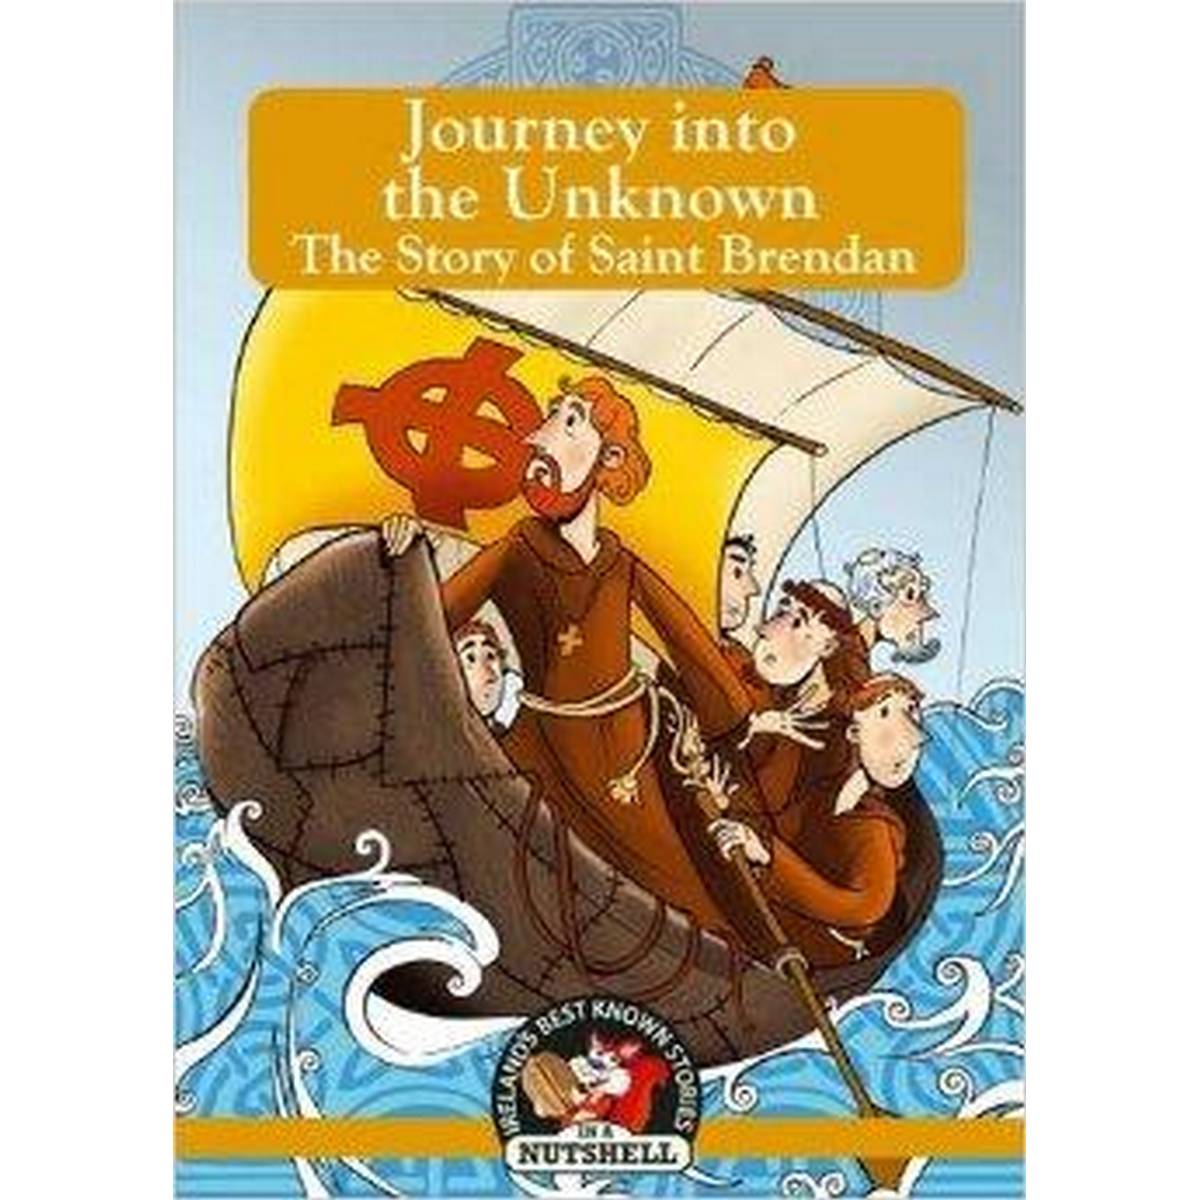 The Story of Saint Brendan-Journey into the Unknown (In a Nutshell) 17